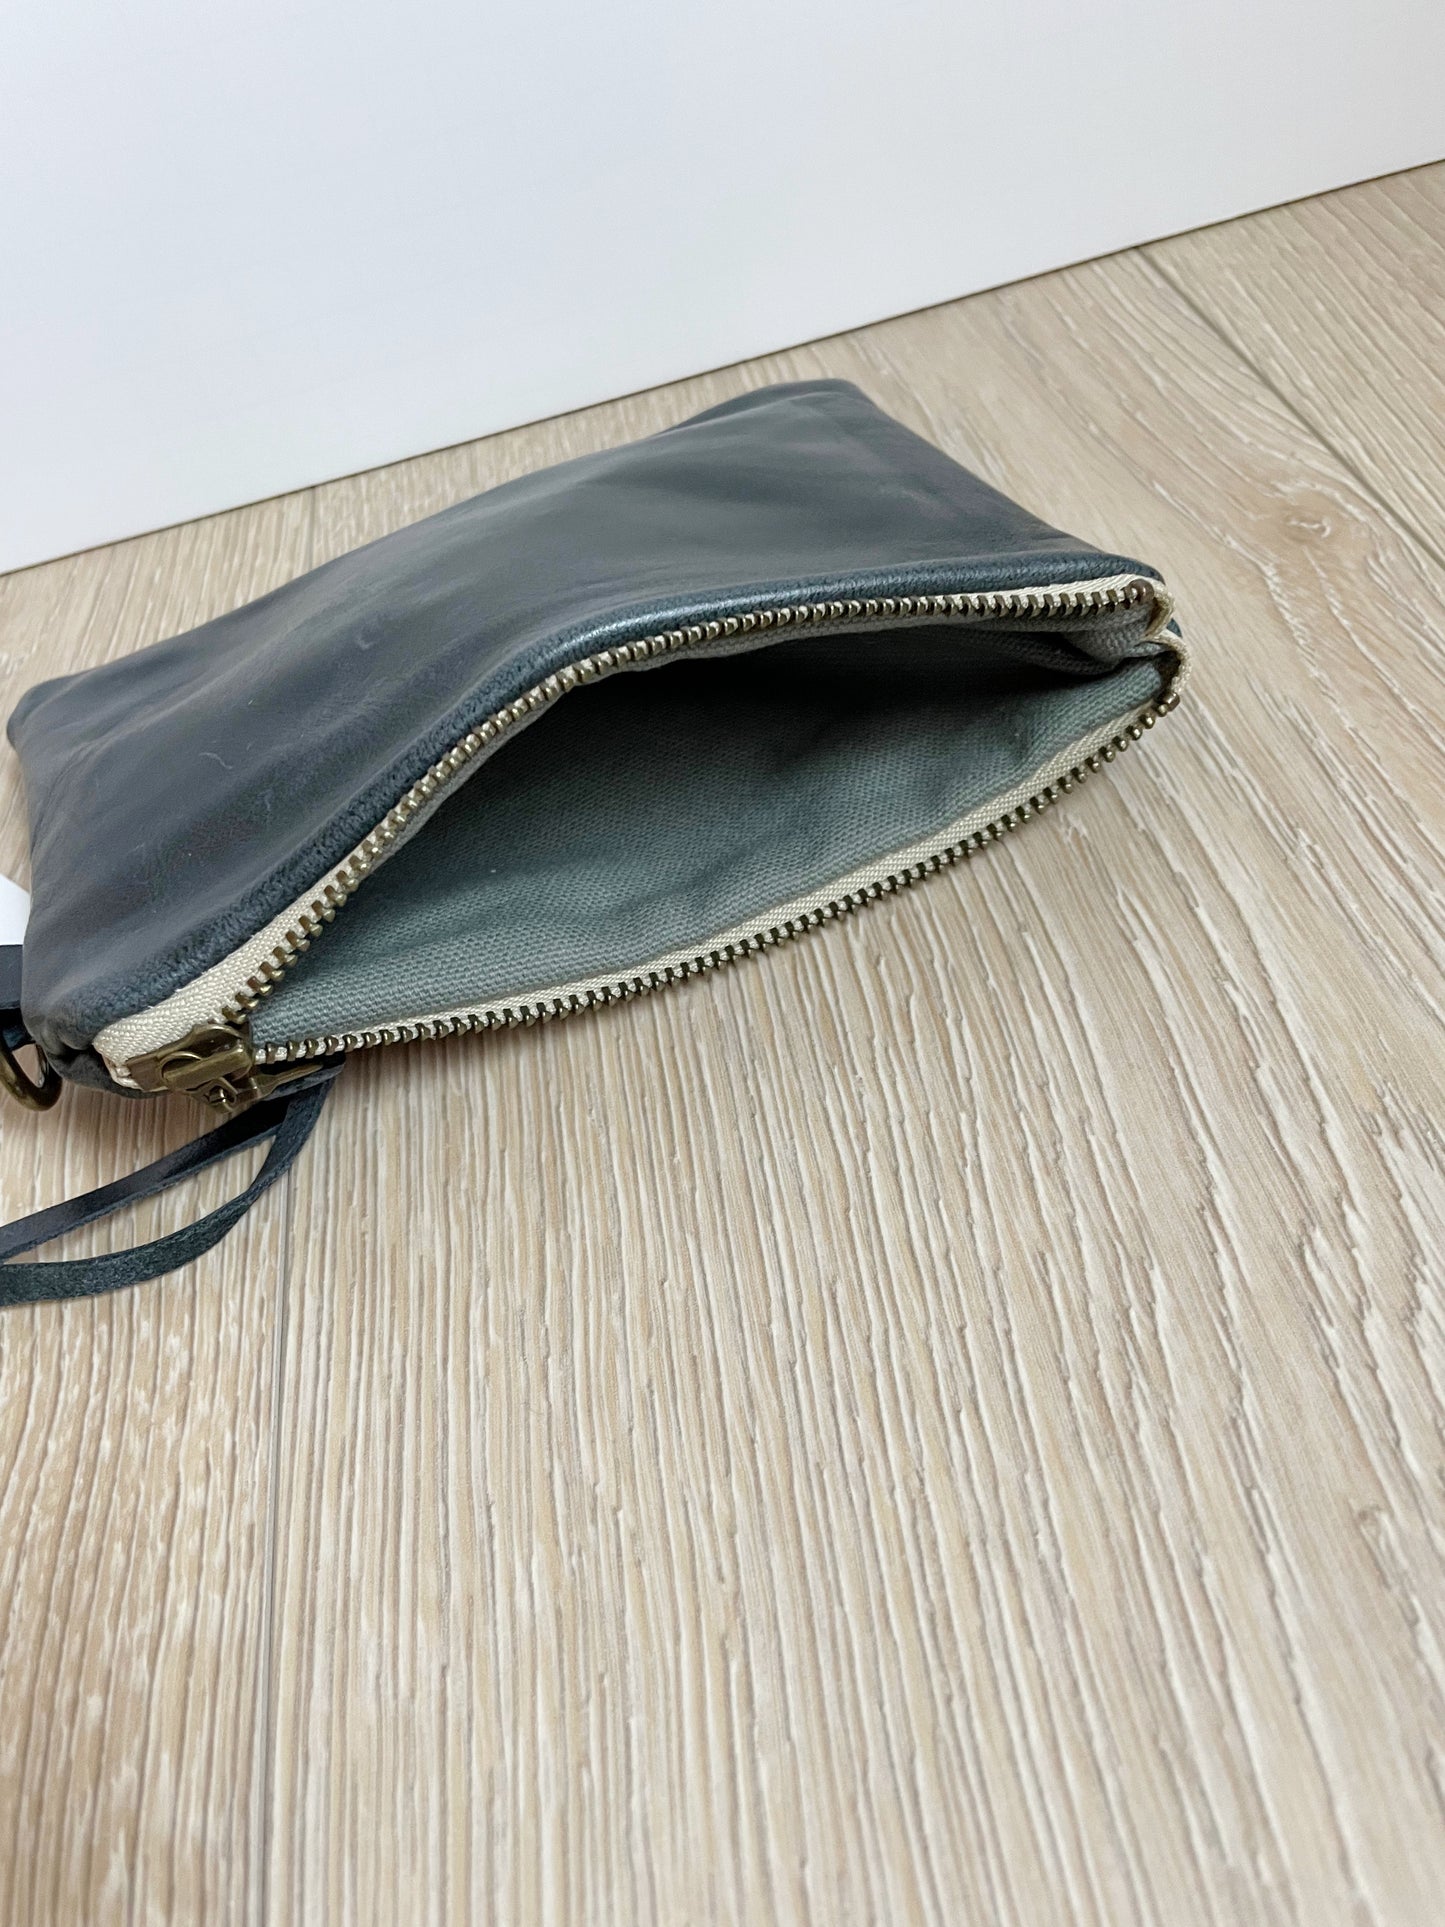 Small Navy Leather pouch